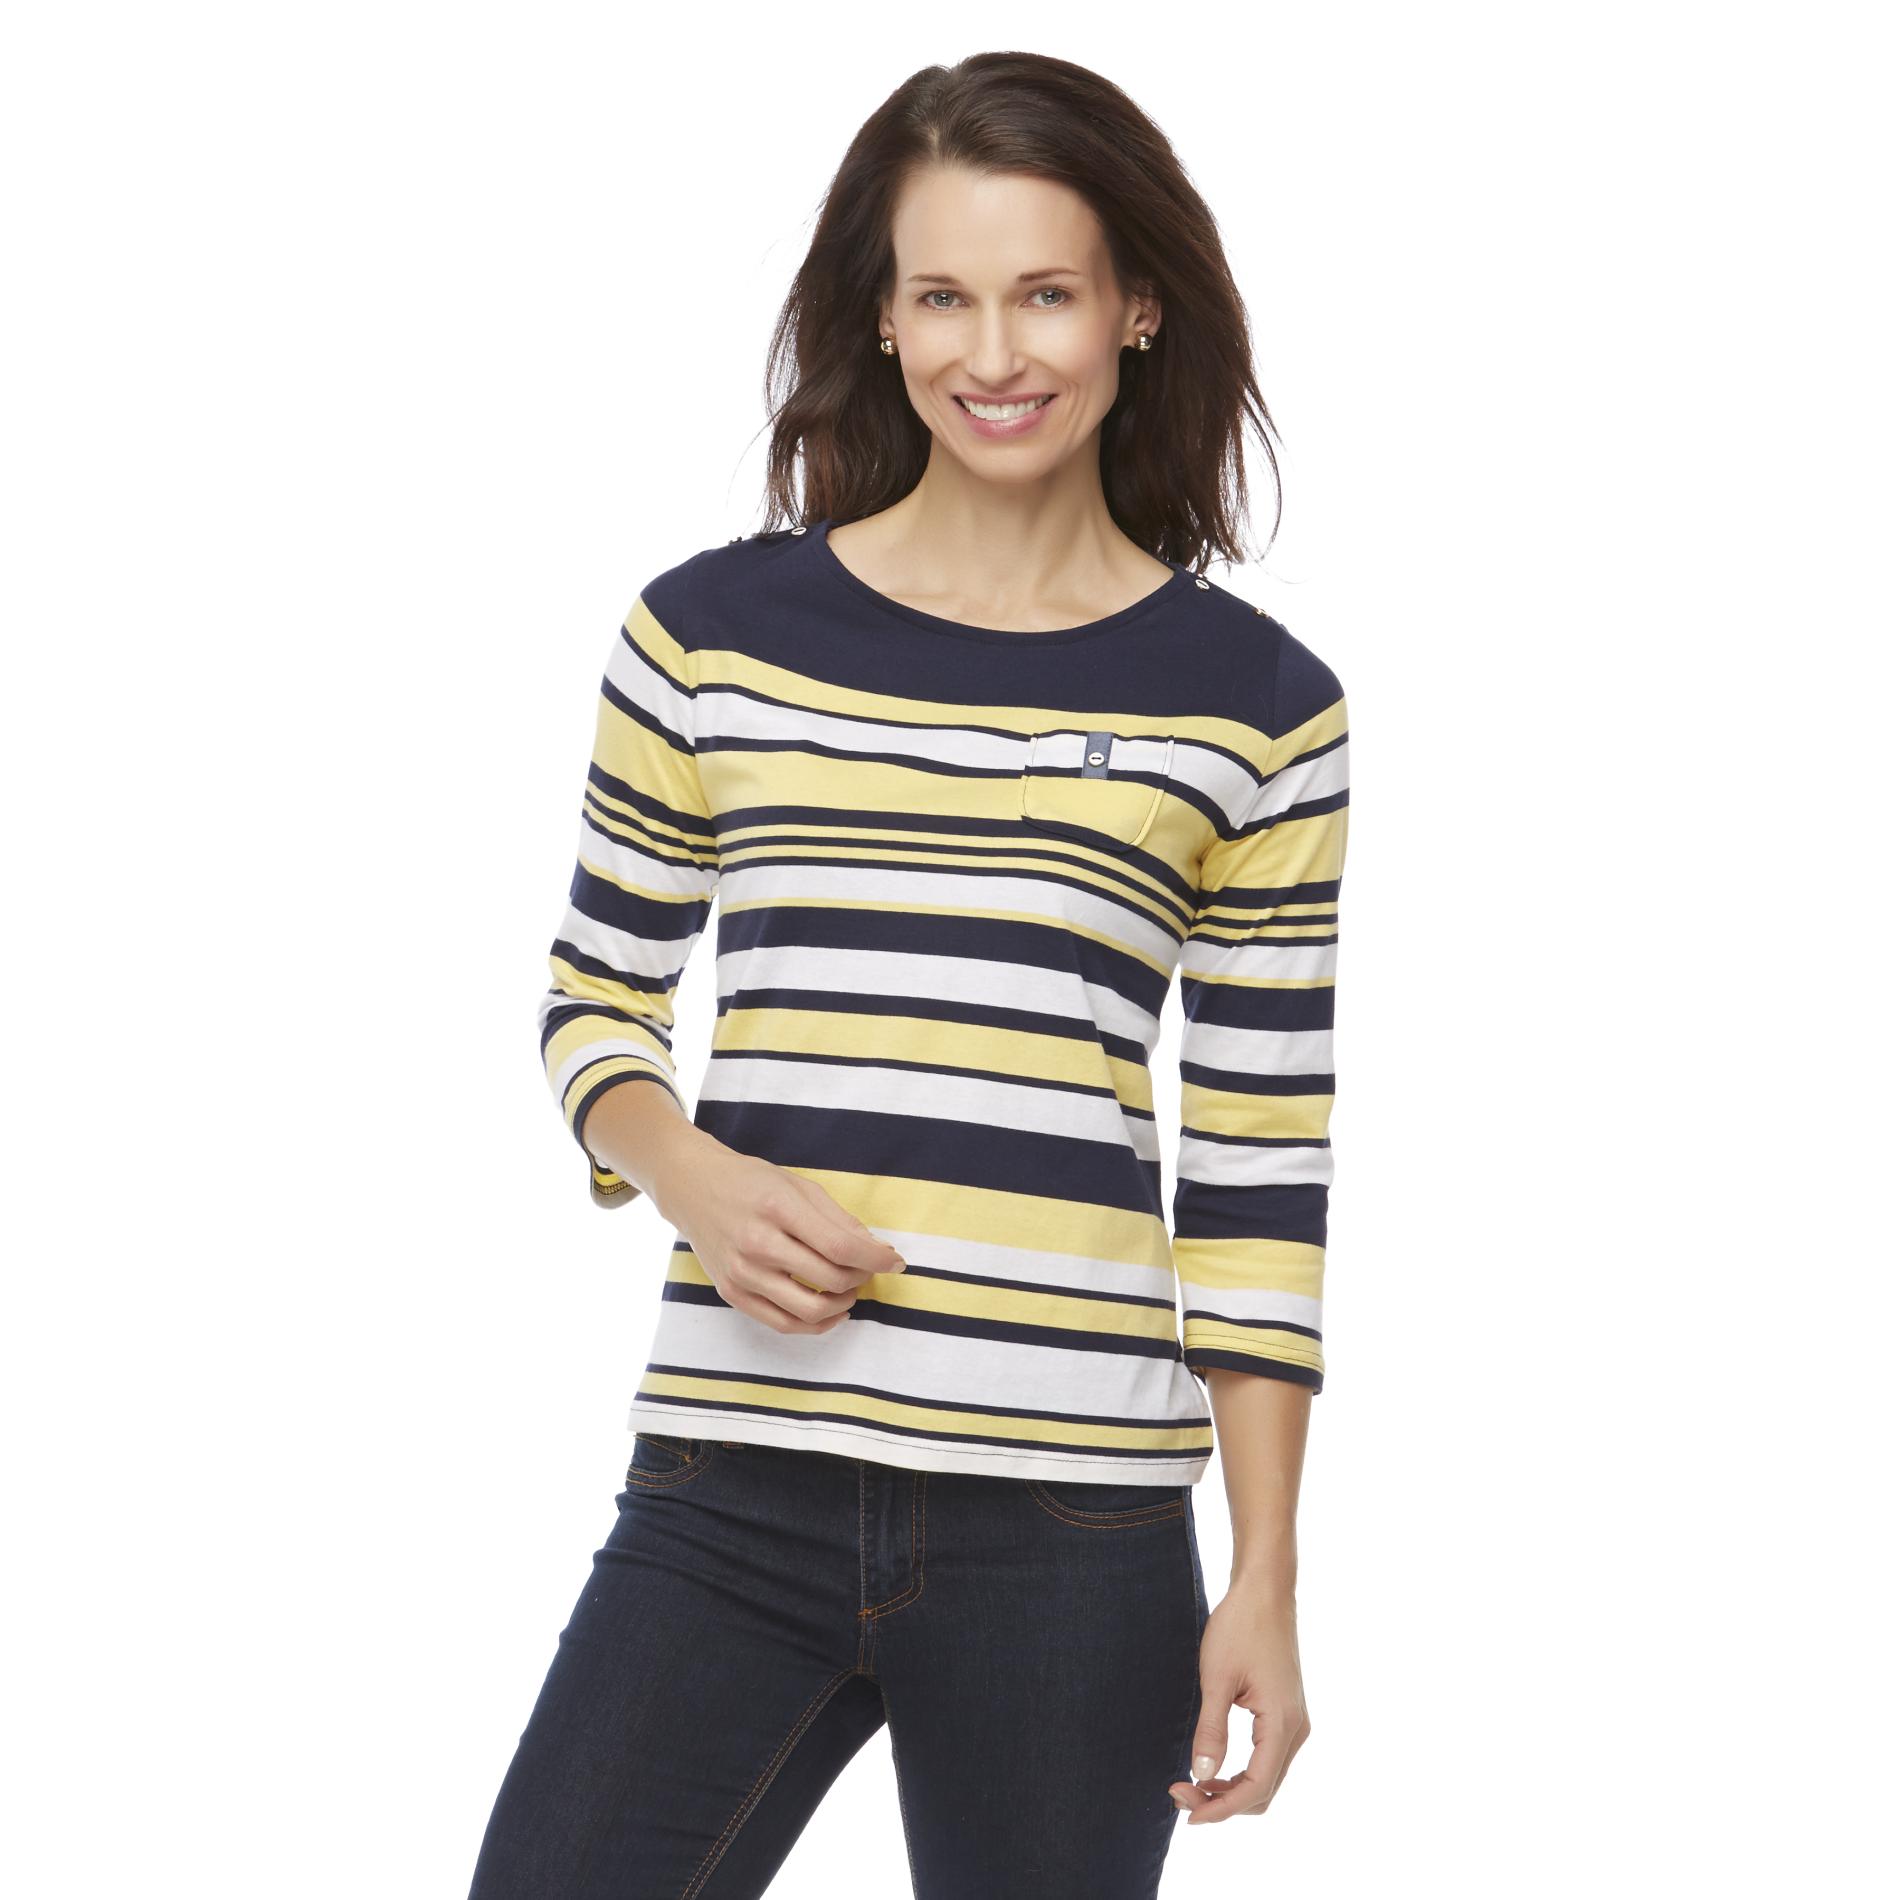 Basic Editions Women's Boat Neck Top - Striped